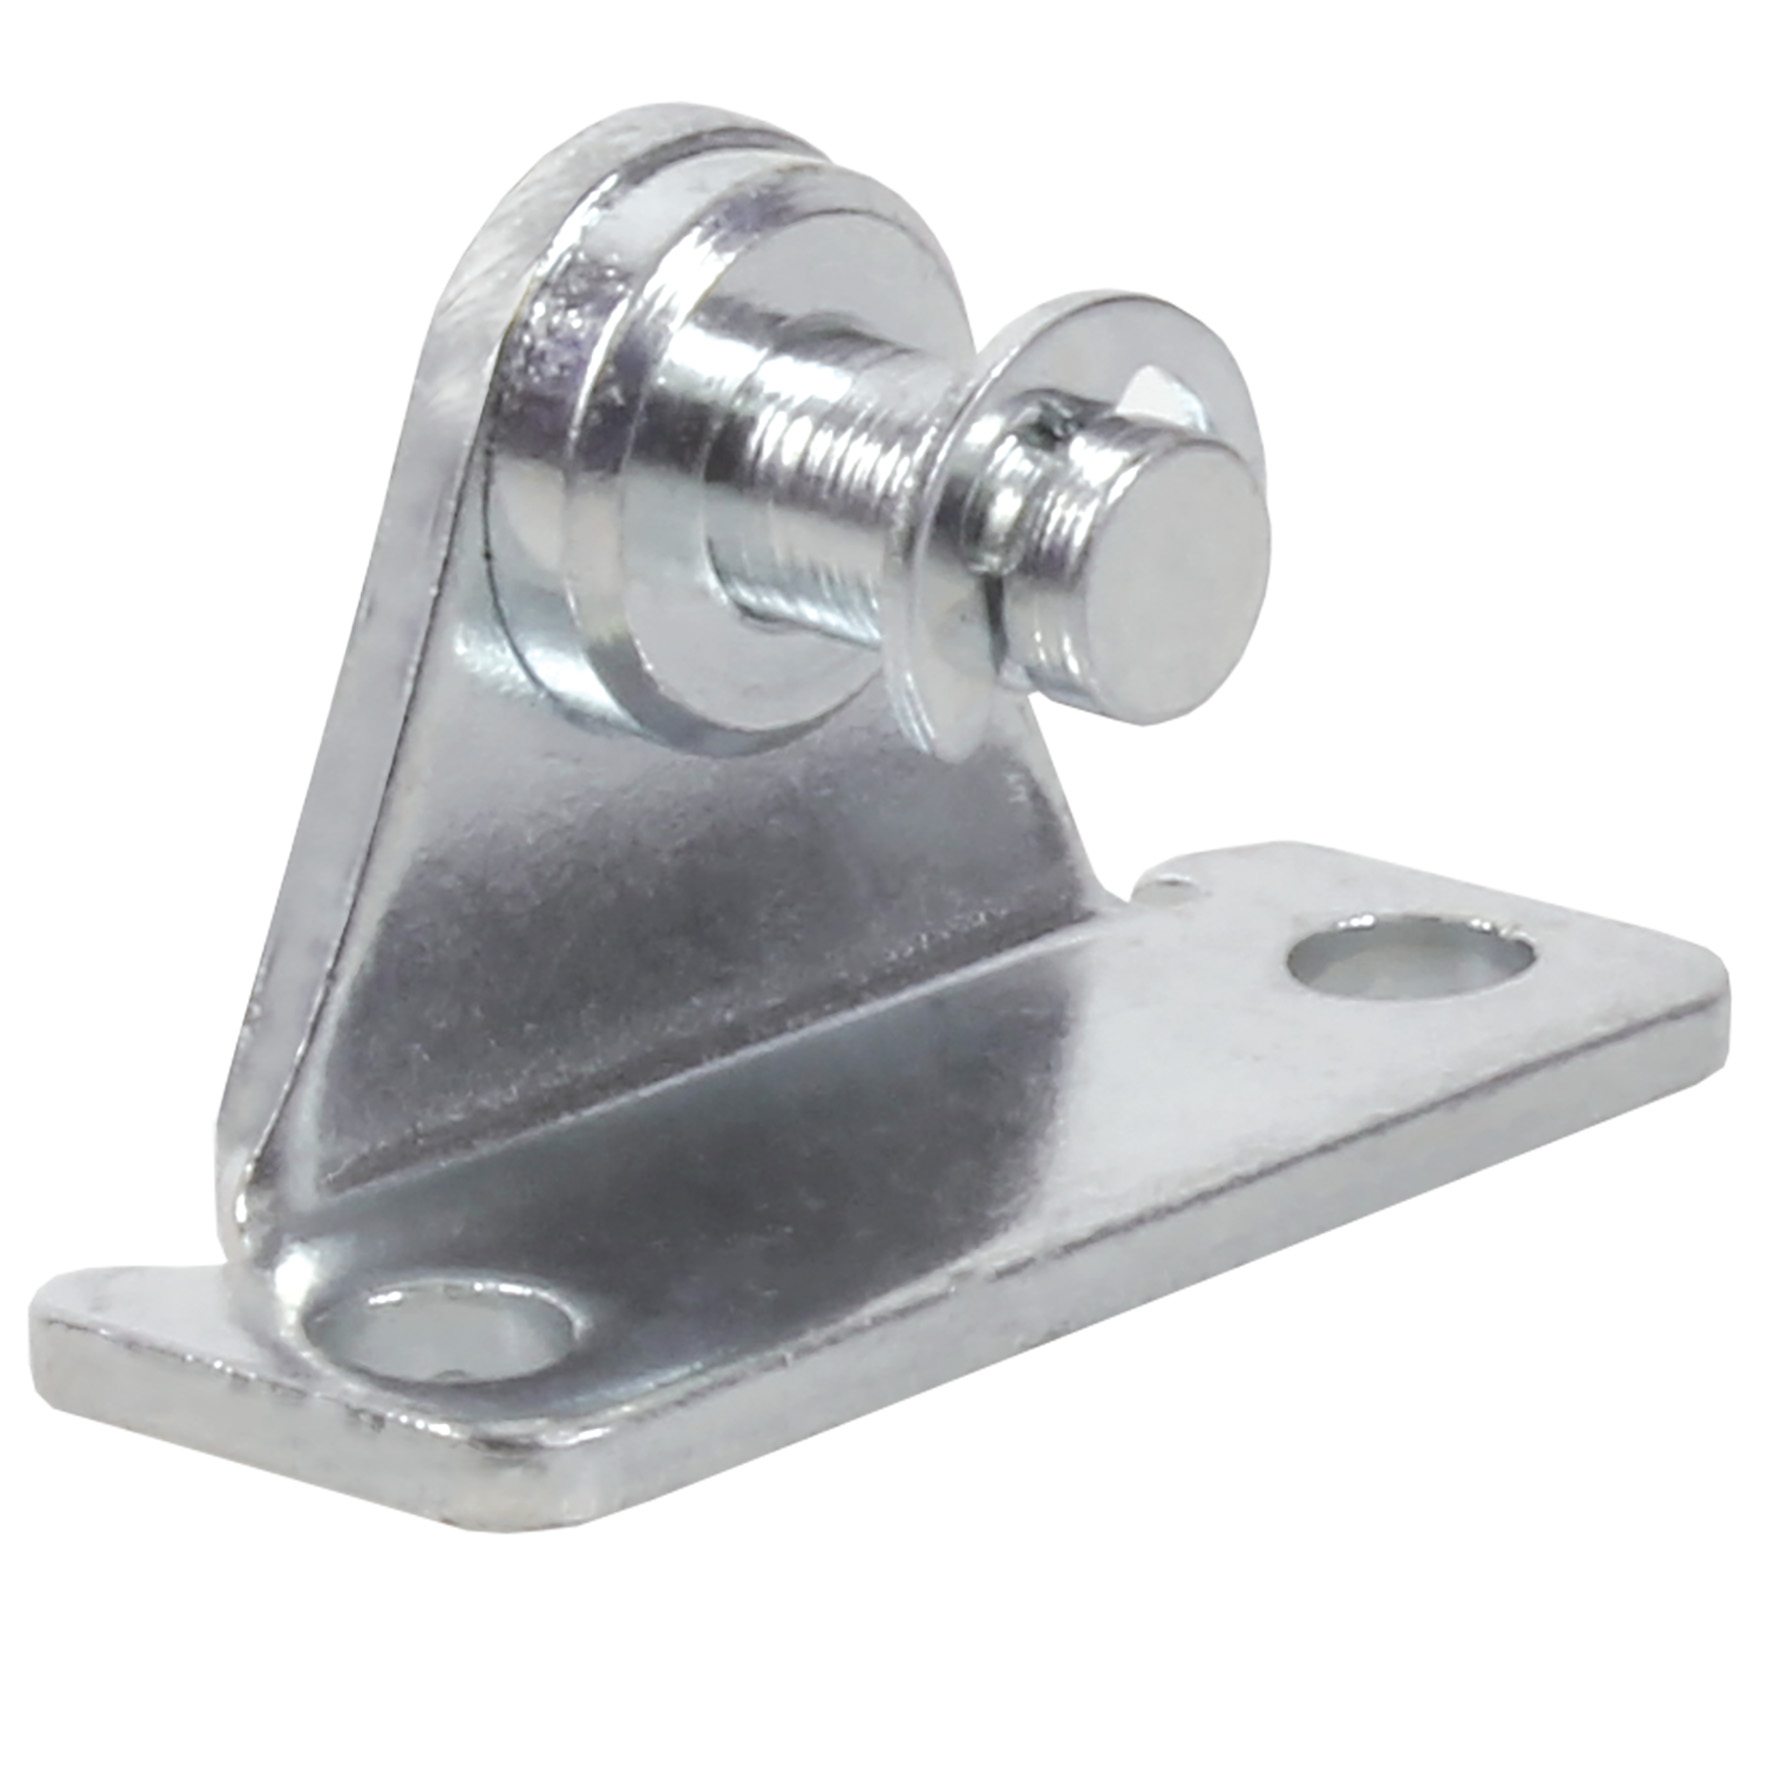 Right angled mounting plate - Right angled mounting plate for clevis - Steel - 